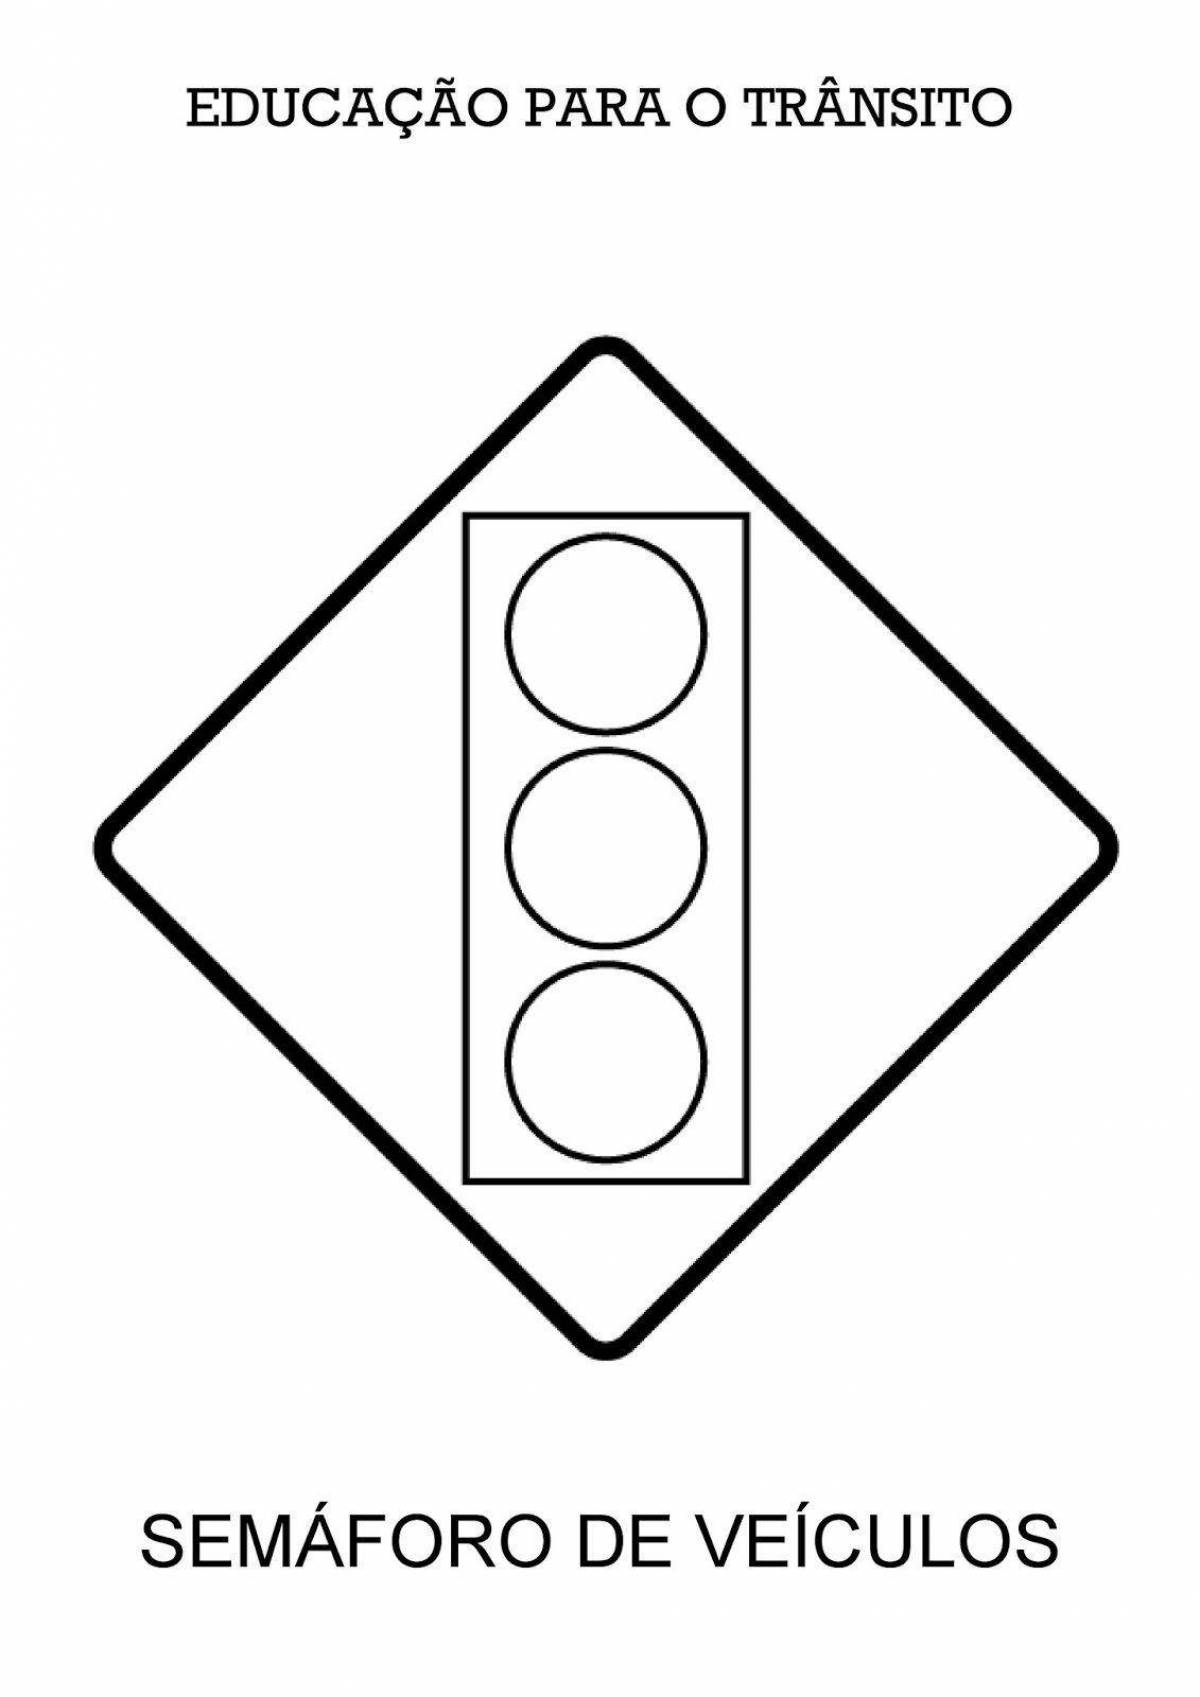 Explosive Road Sign Coloring Page for 5-6 year olds